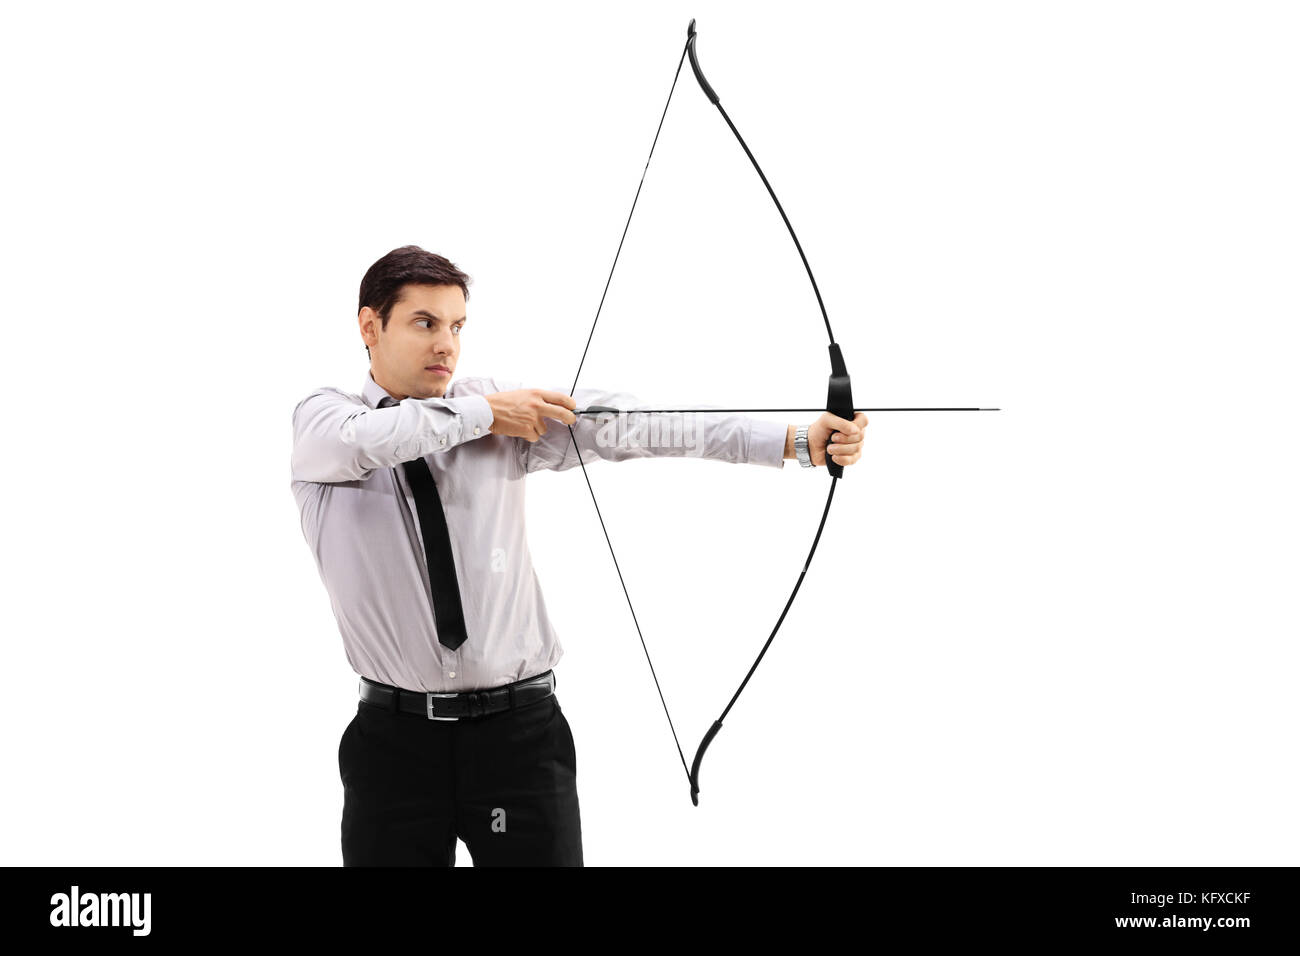 Businessman aiming with a bow and arrow isolated on white background Stock Photo